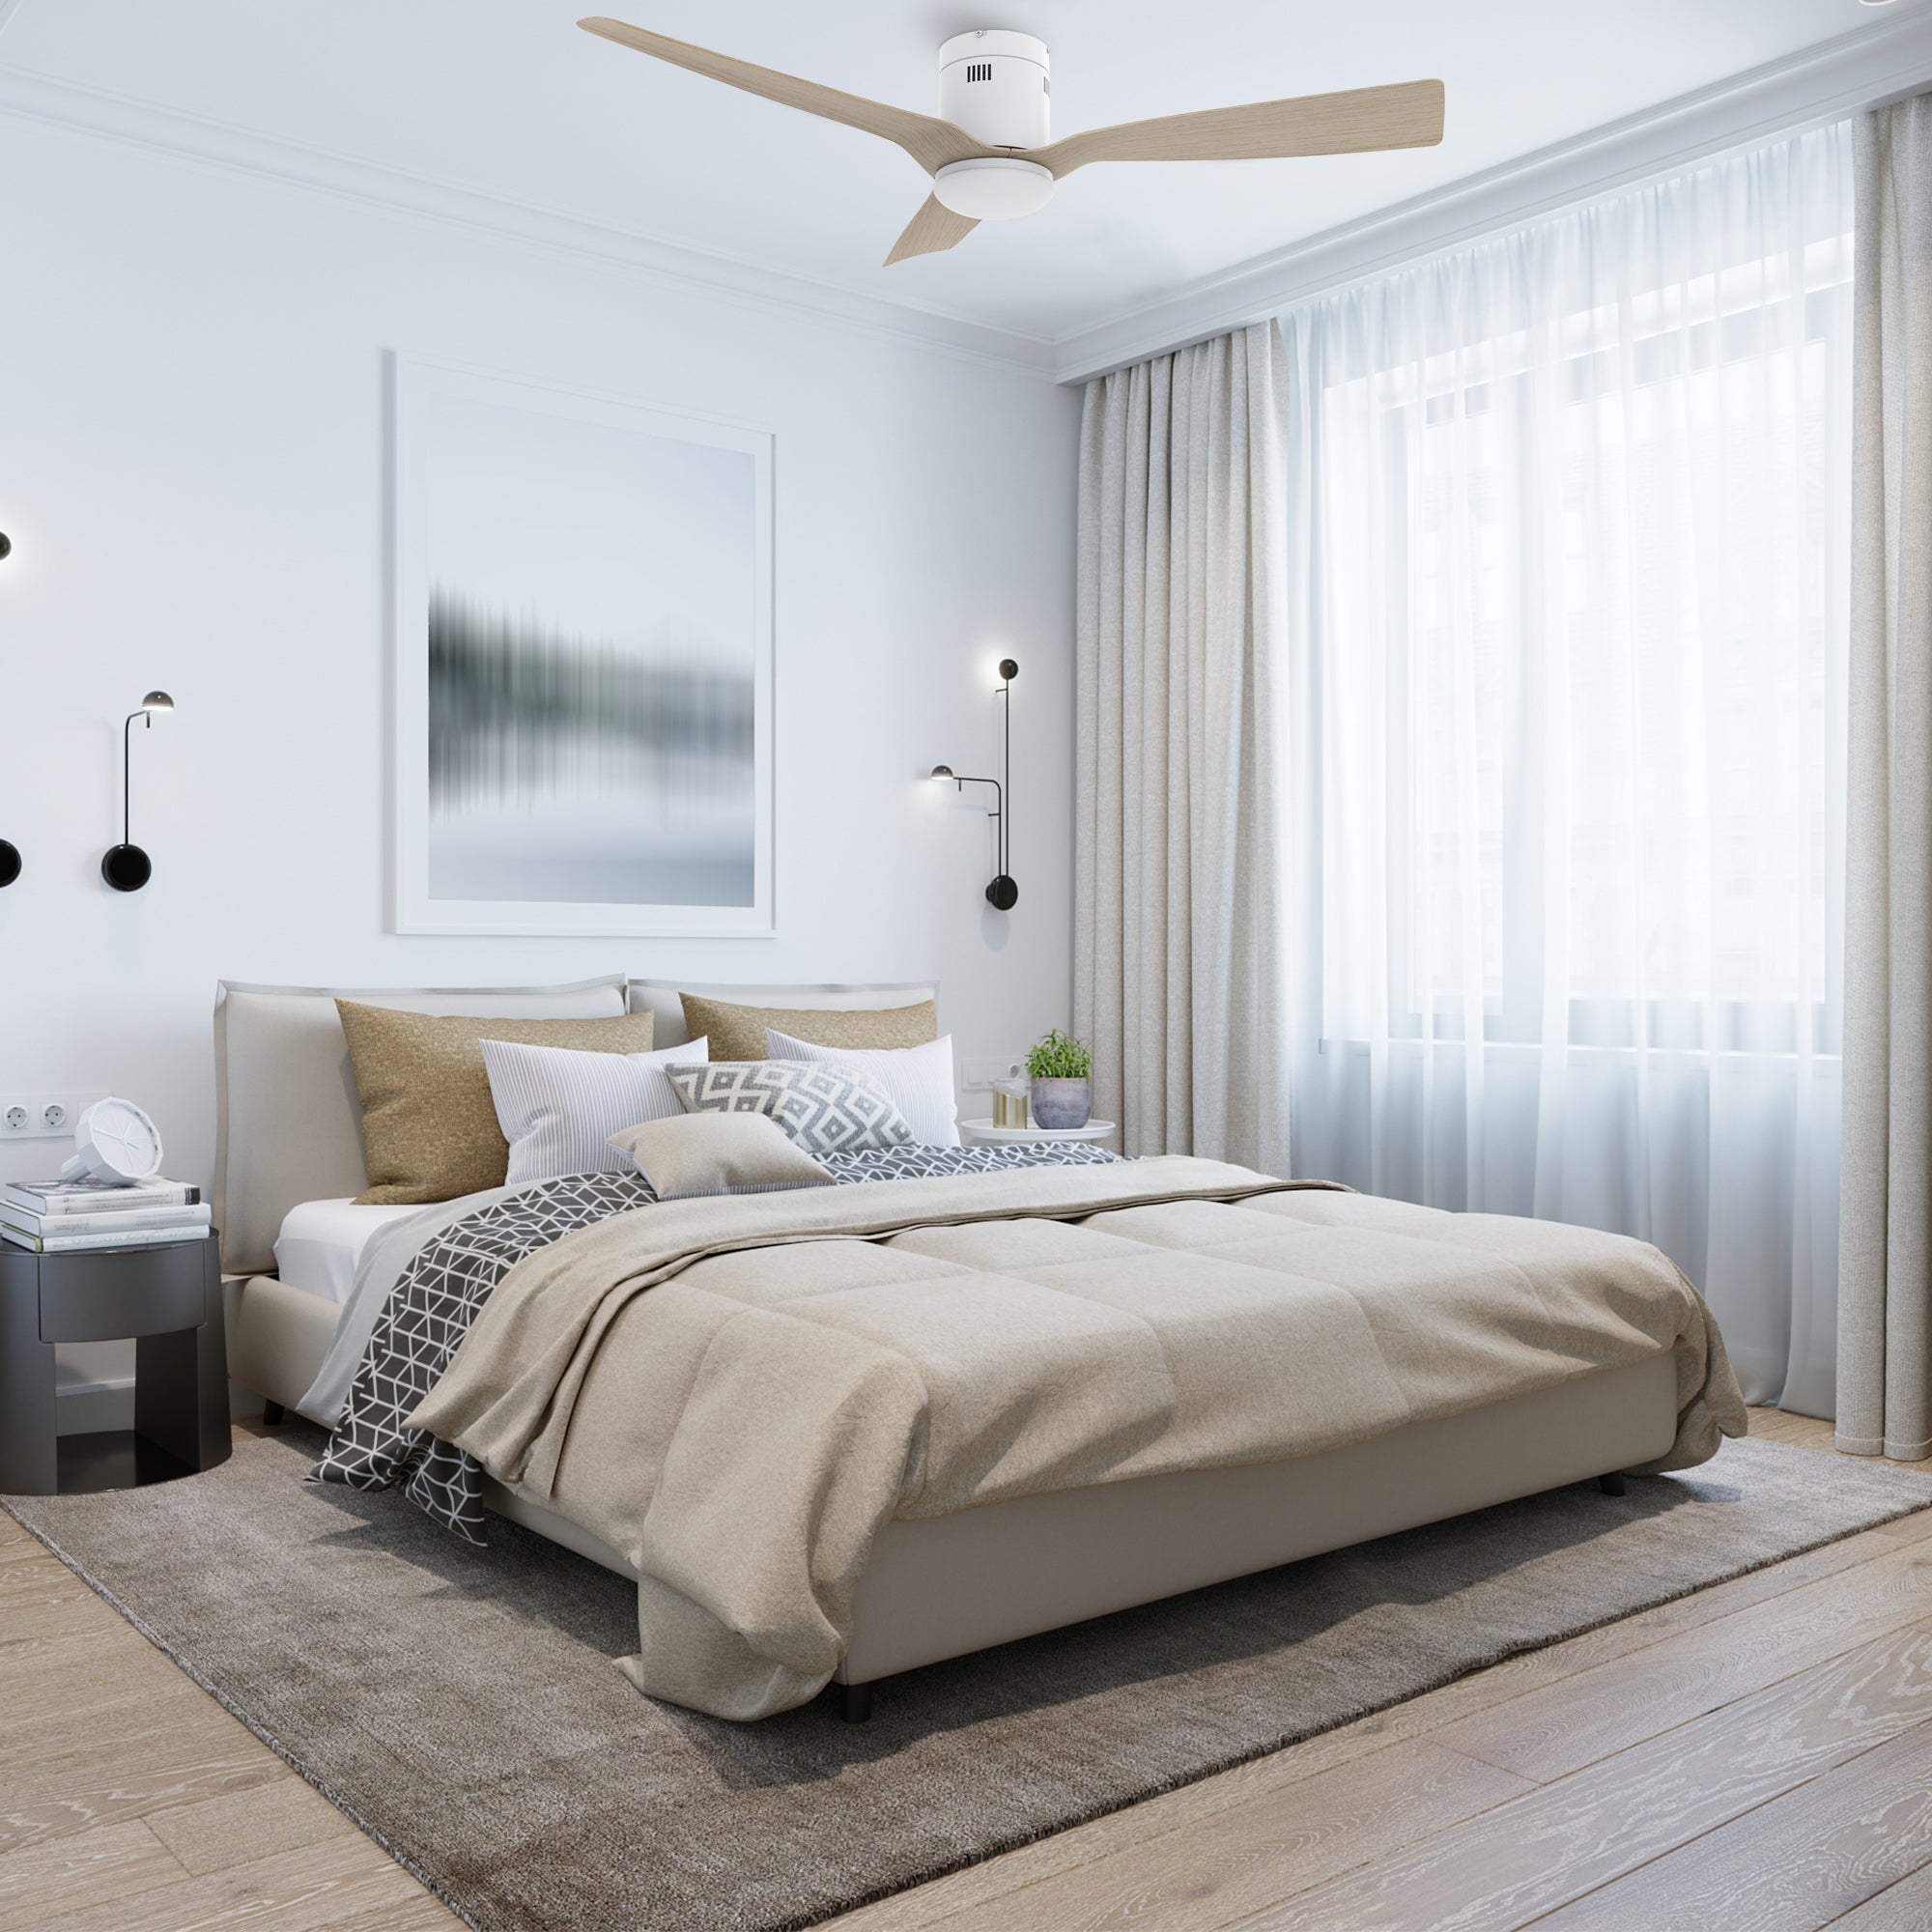 Smafan Elite Smart Ceiling Fan is compatible with Alexa, Siri, Google Assistant, smart app. It will bring a modern touch to your home décor. Elegant, quietness, and energy saving are some of its advantages. Available for outdoor/indoor use. 